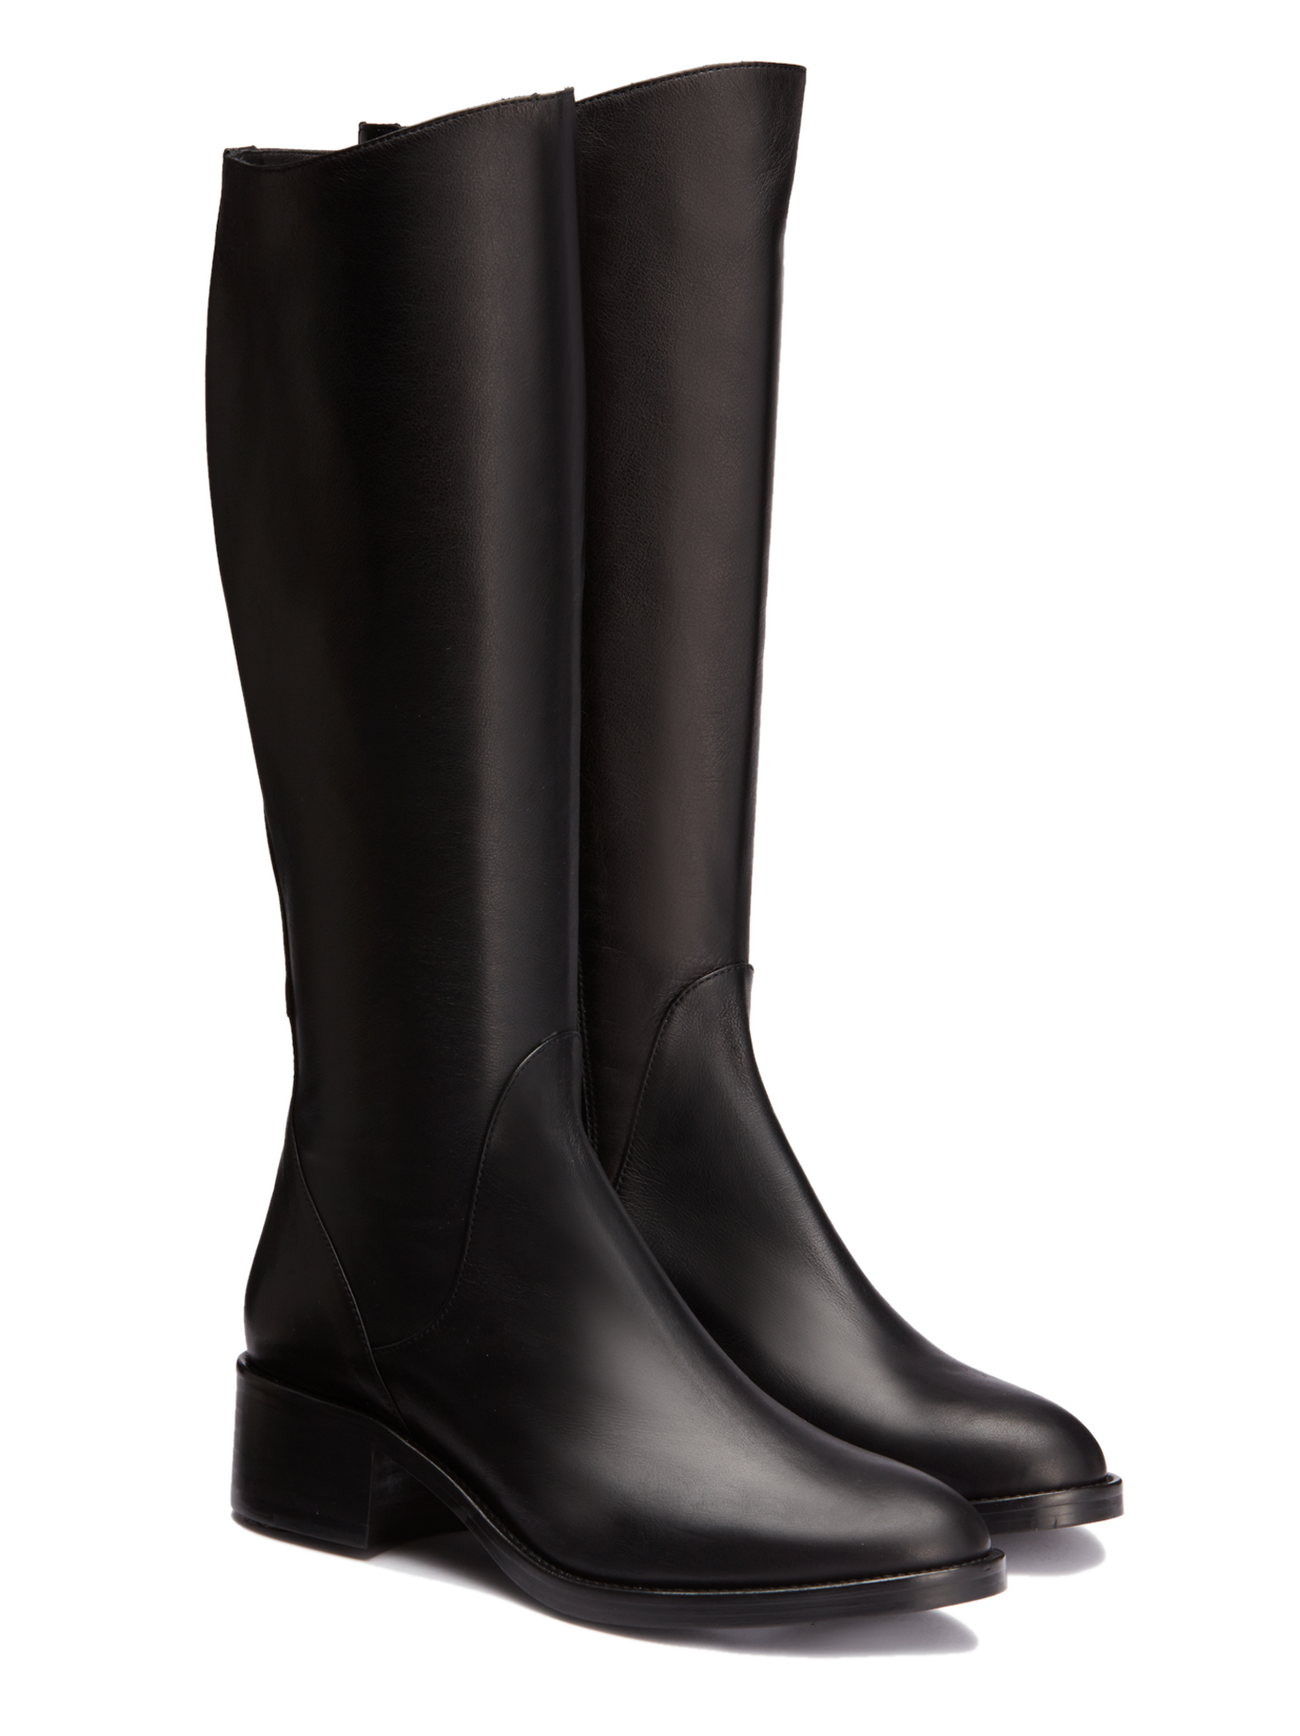 Kestrel Black Leather Knee High Boots | DuoBoots | Fit Beautifully